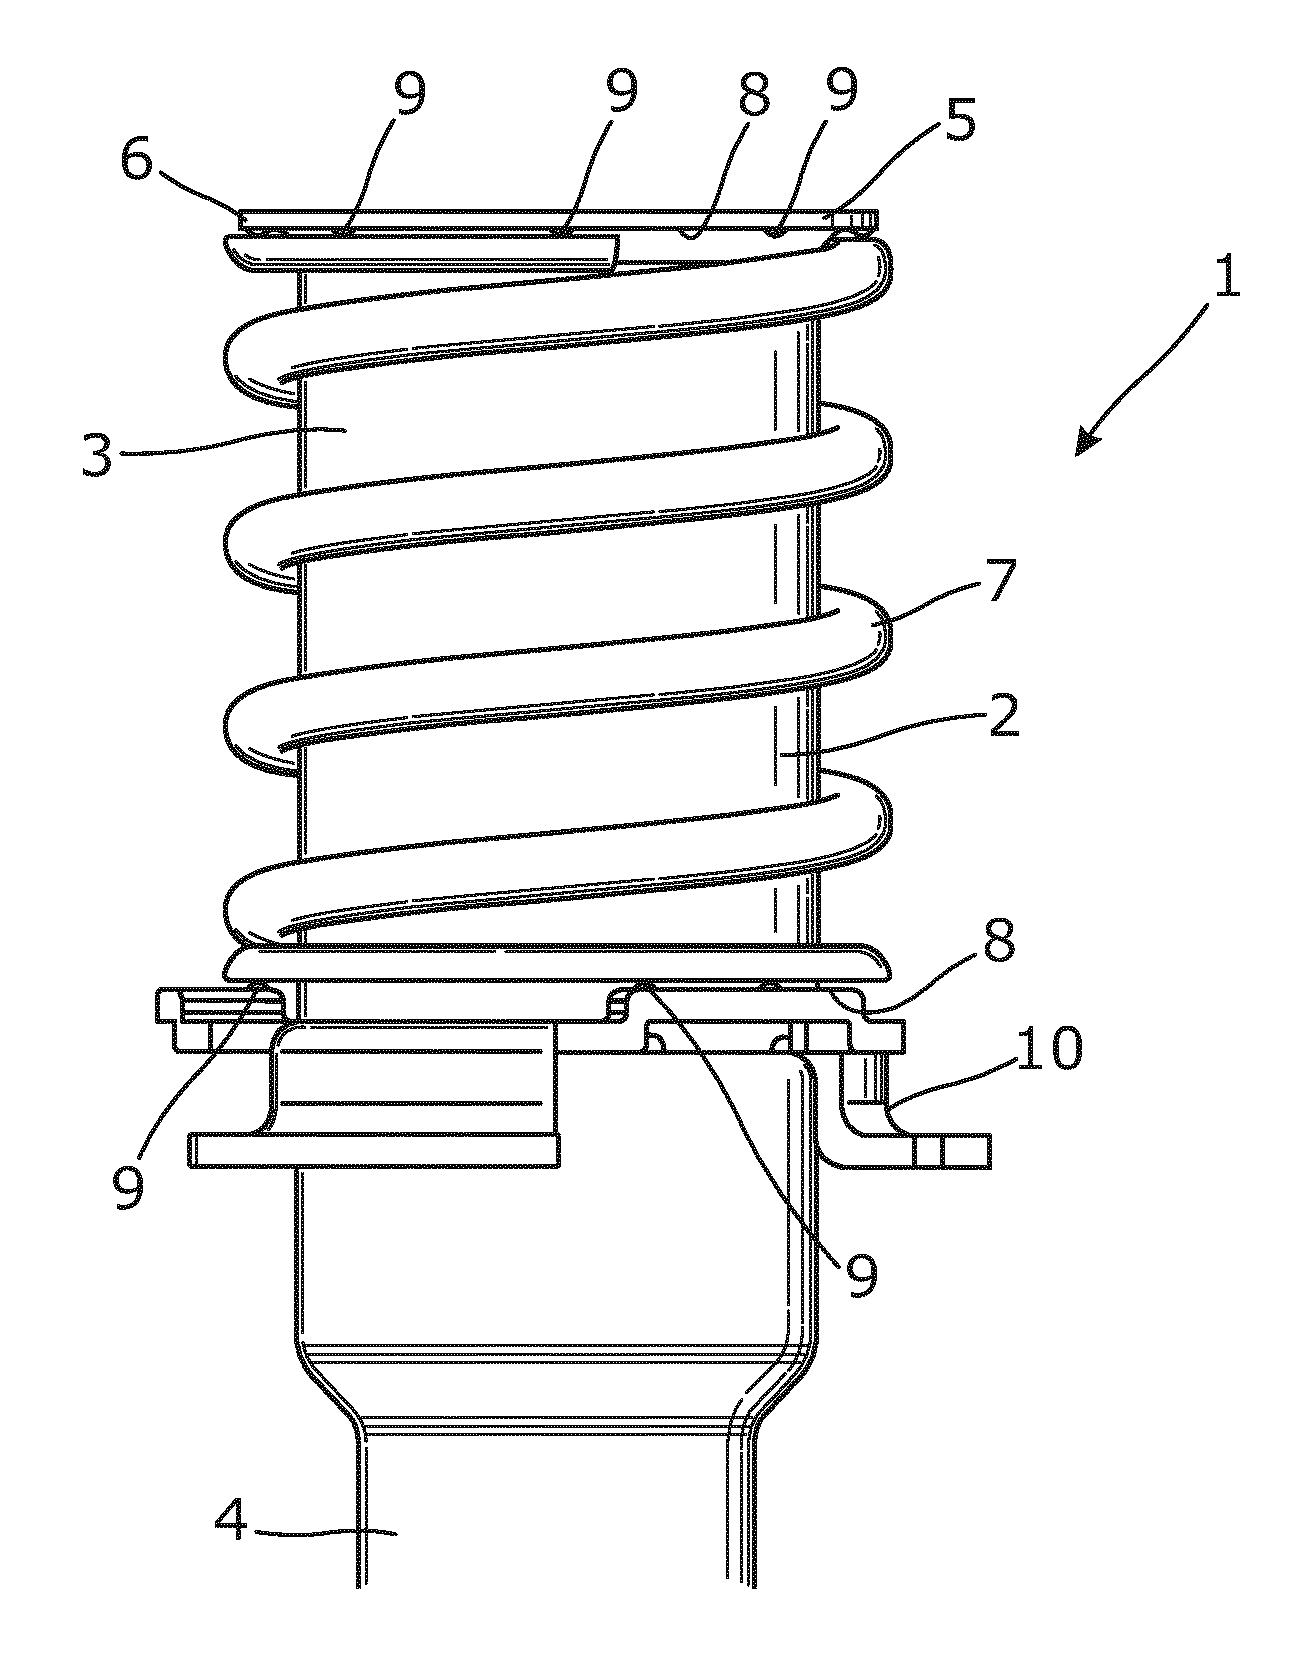 An extractor tube element